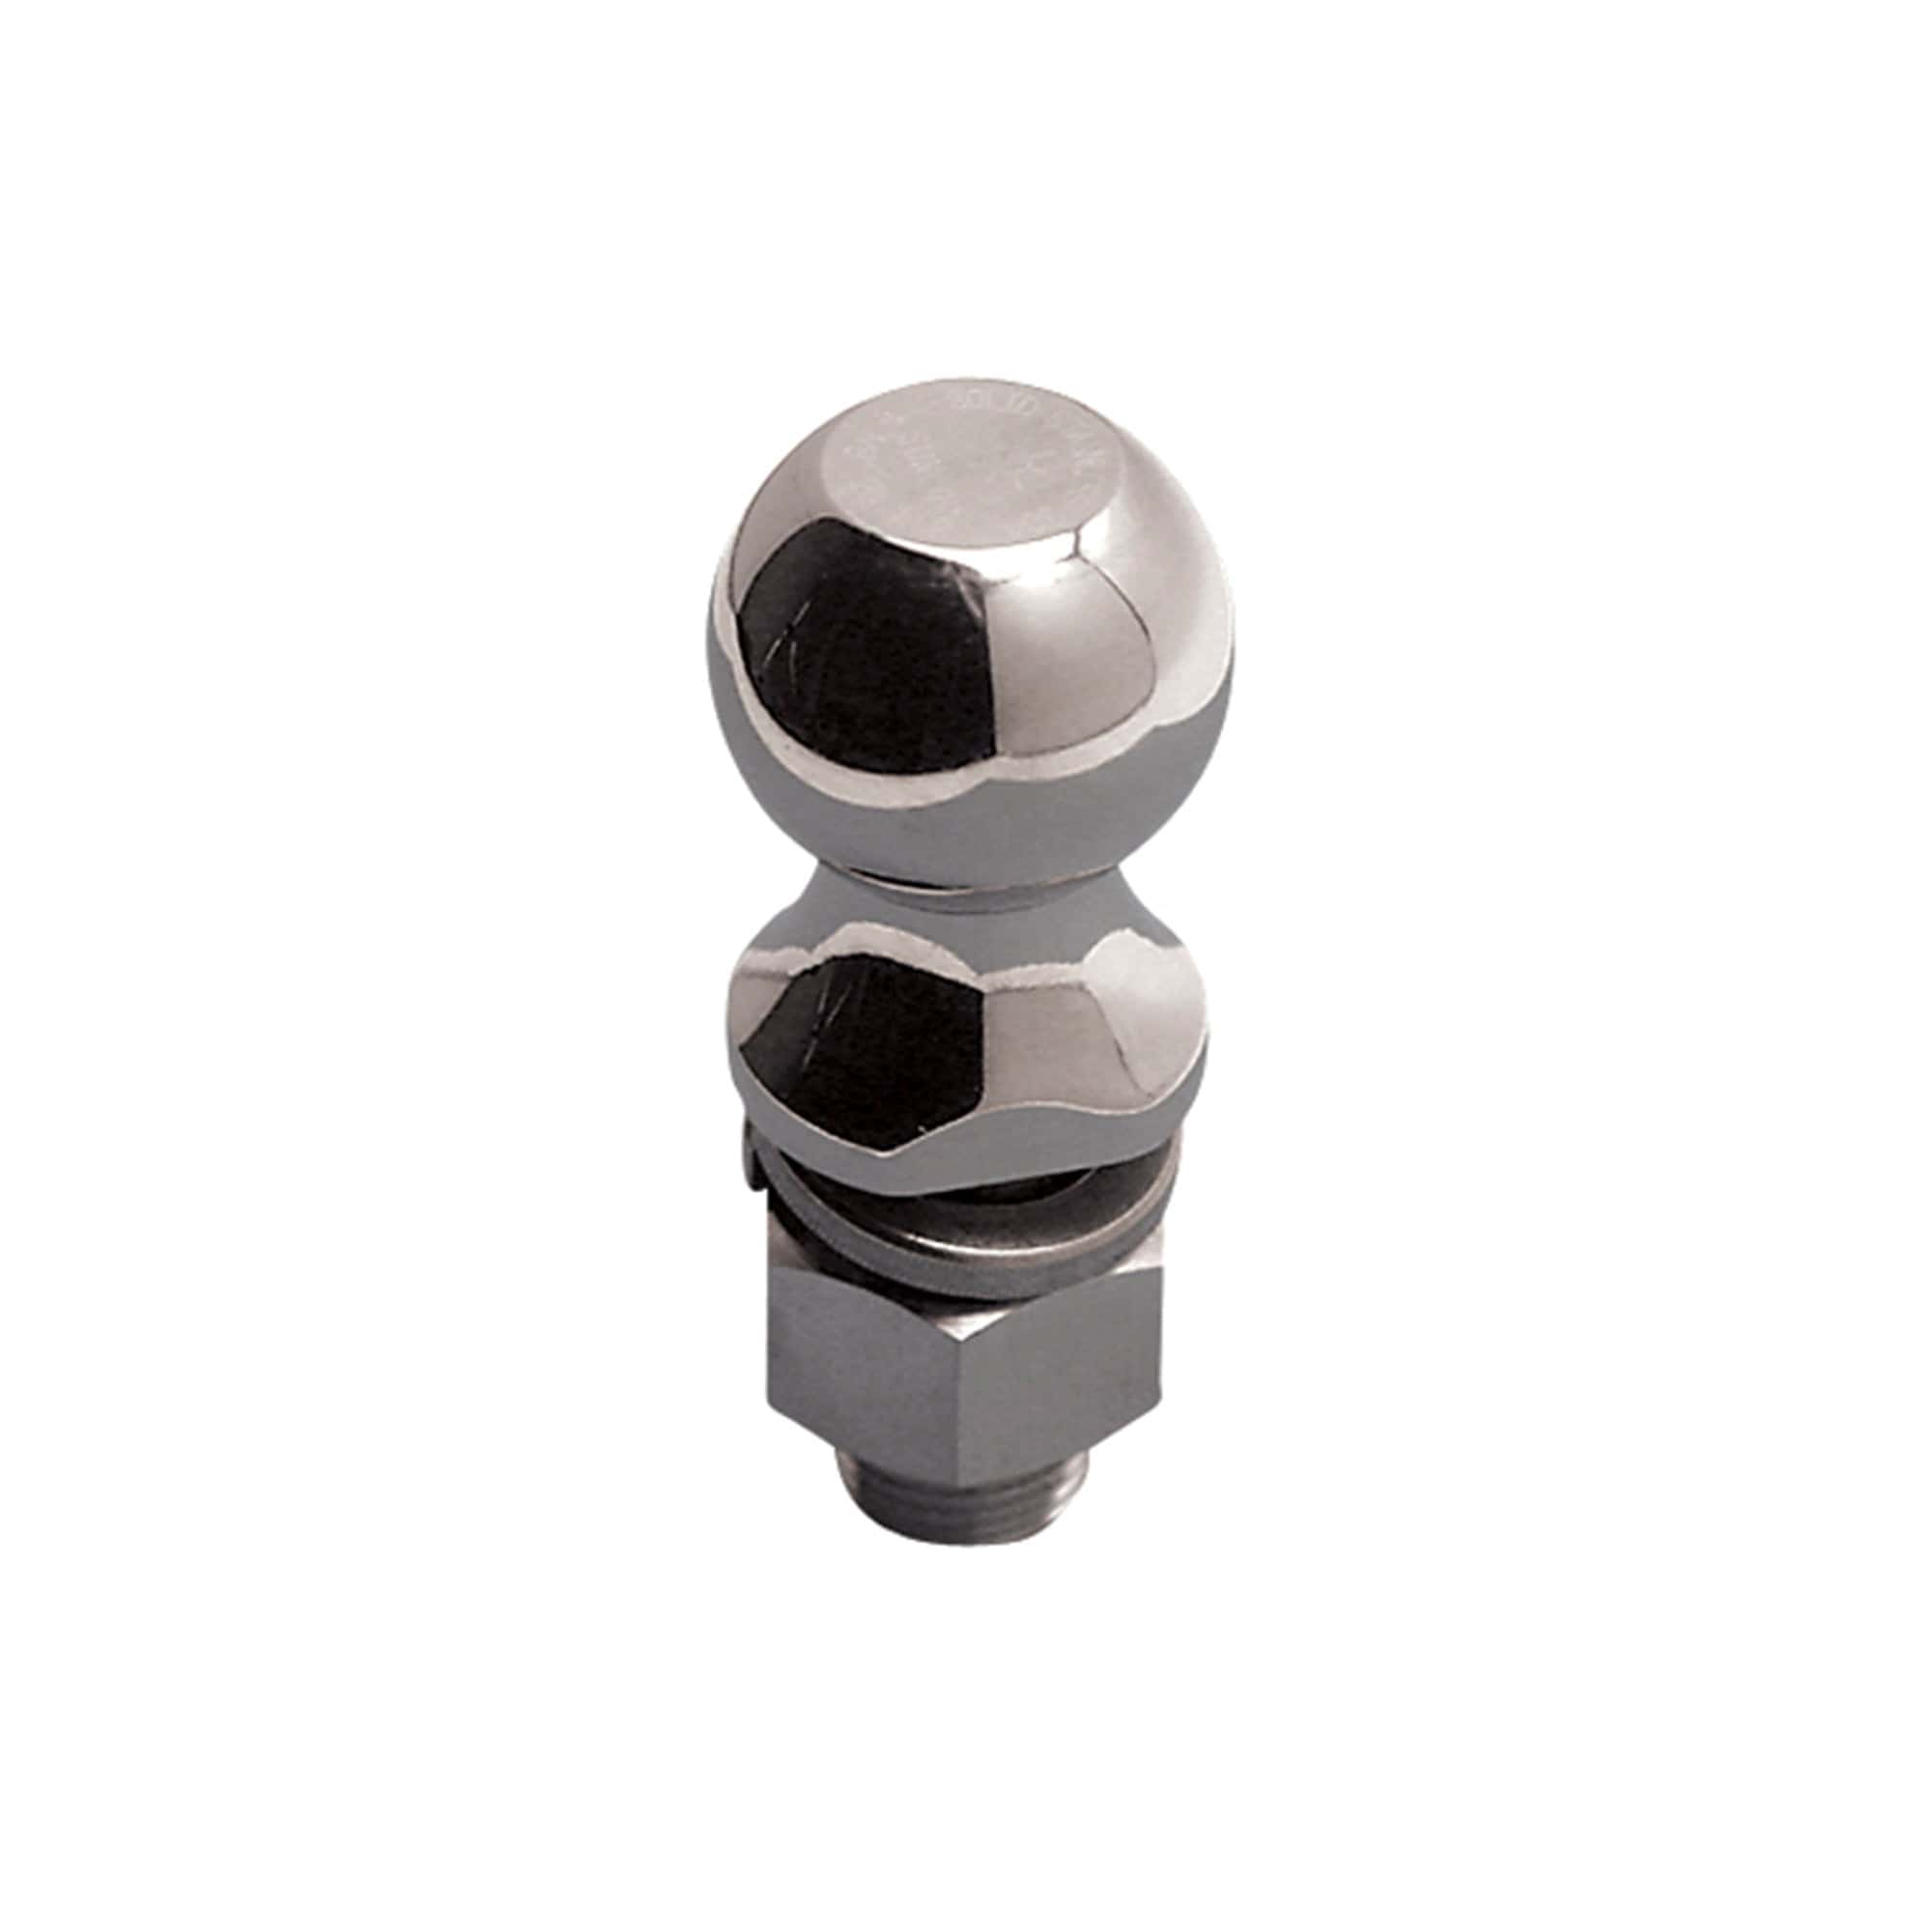 Hitch Ball 1-7/8" X 1", 304 SS - Suncor Stainless C0260-4725